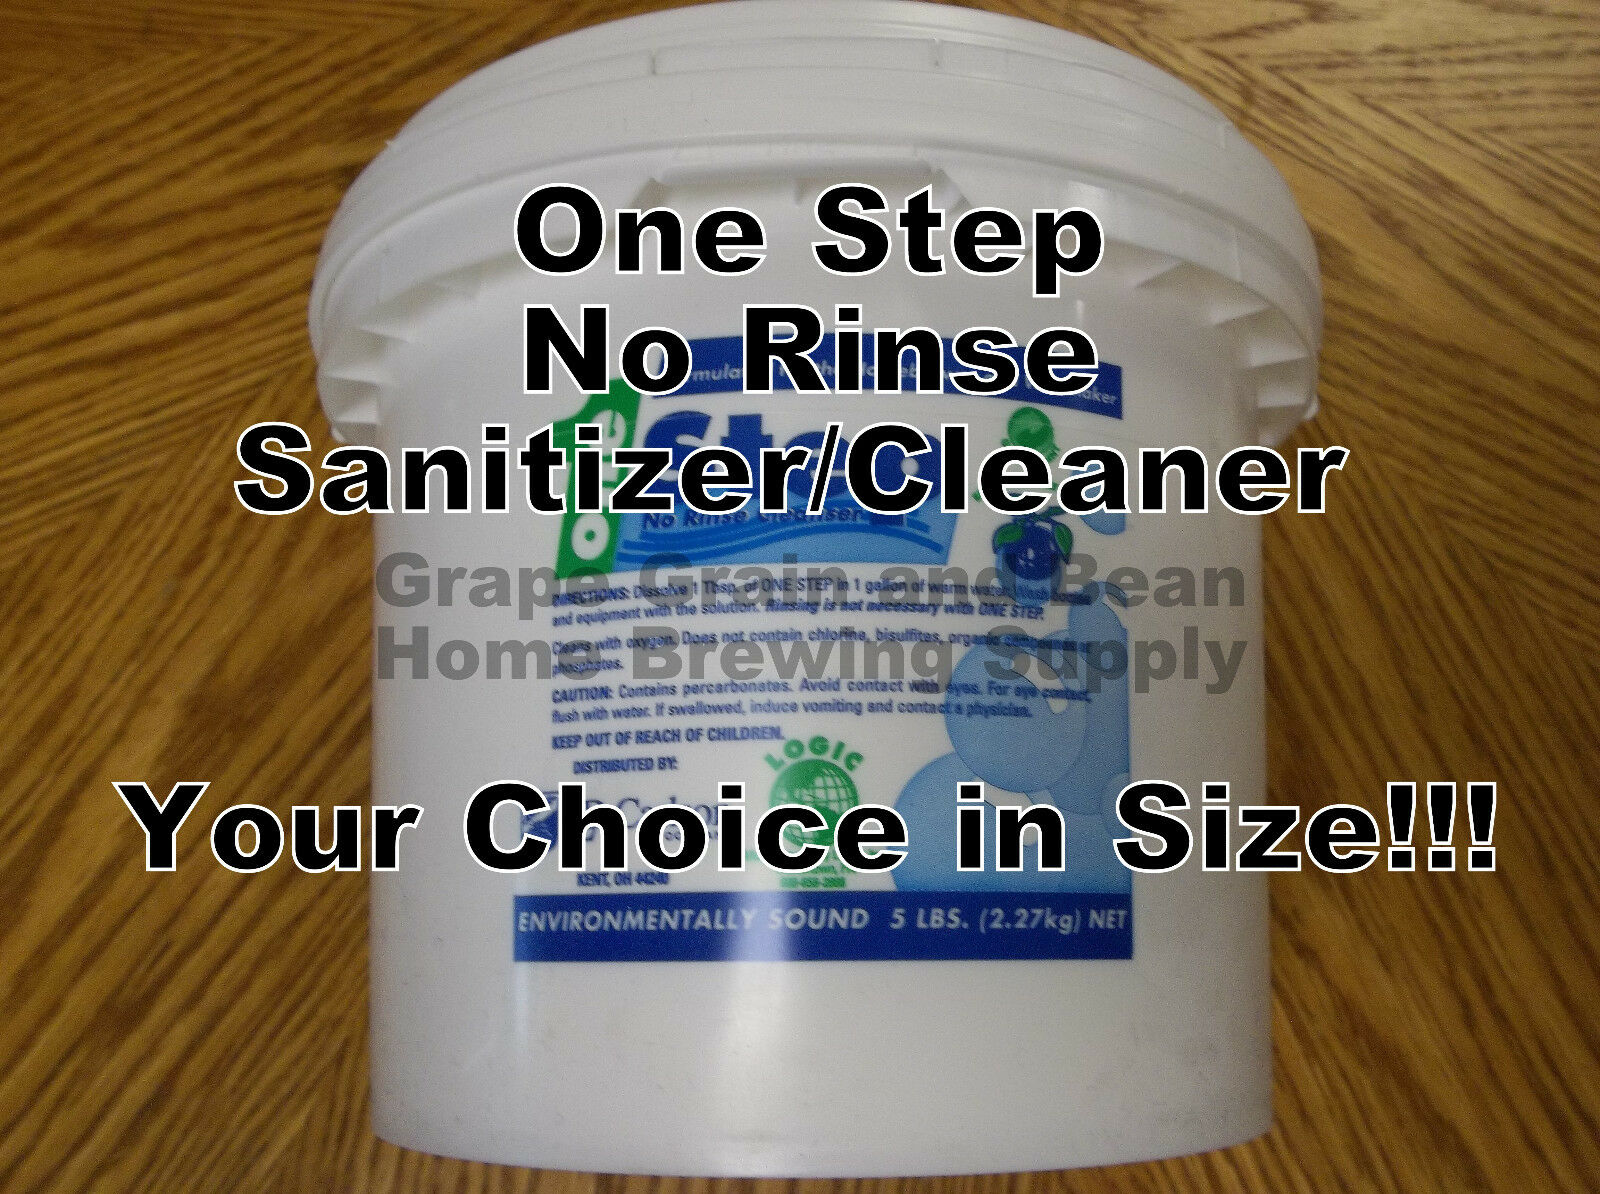 One Step Cleanser, Sanitizer, No Rinse Cleaner/sanitizer, Your Choice In Size!!!